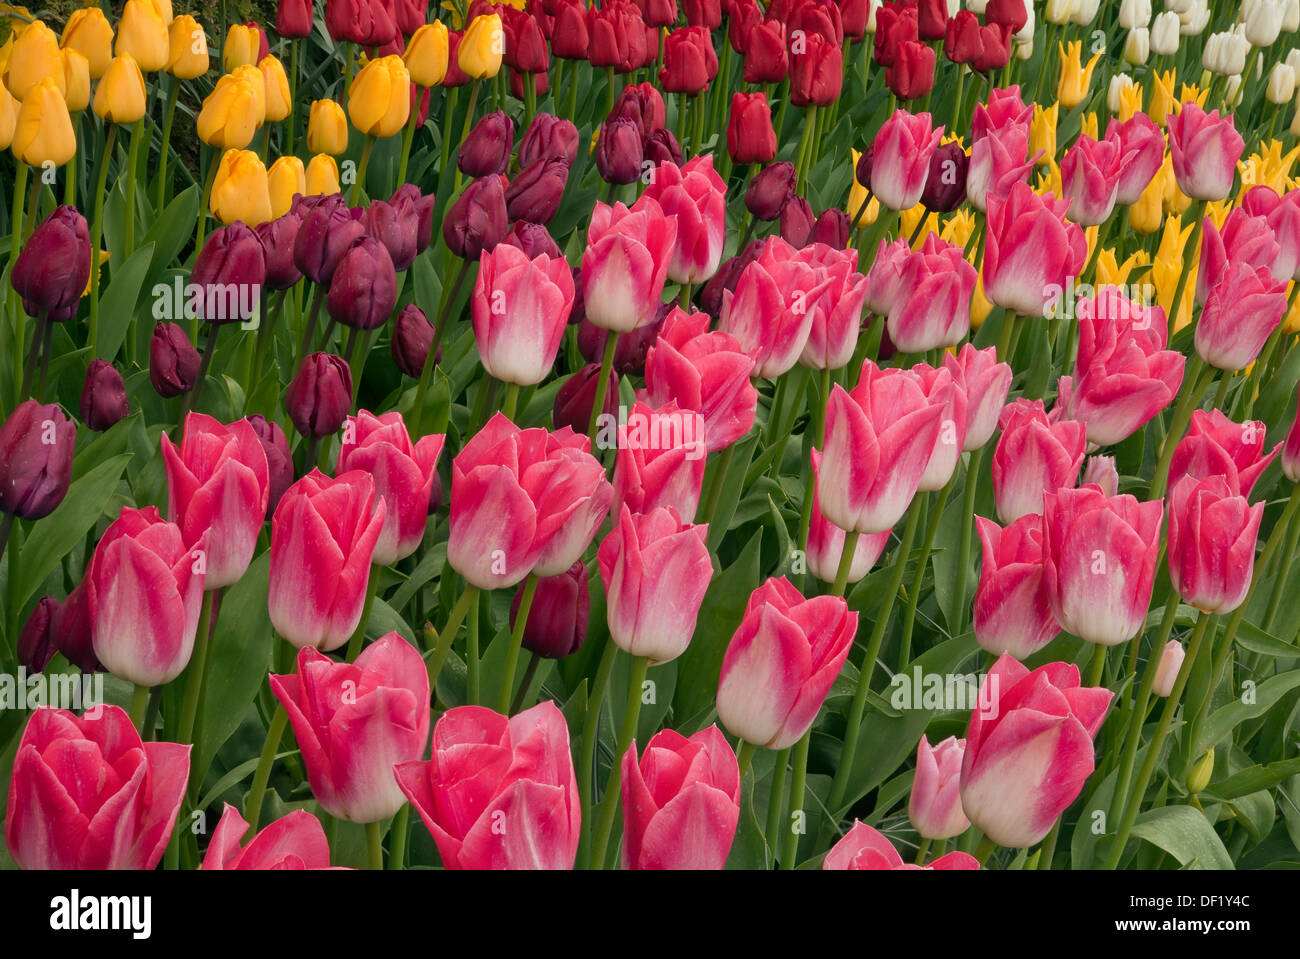 WASHINGTON - Tulips blooming in a display garden at RoozenGaarde Bulb Farm in the Skagit Valley near Mount Vernon. Stock Photo